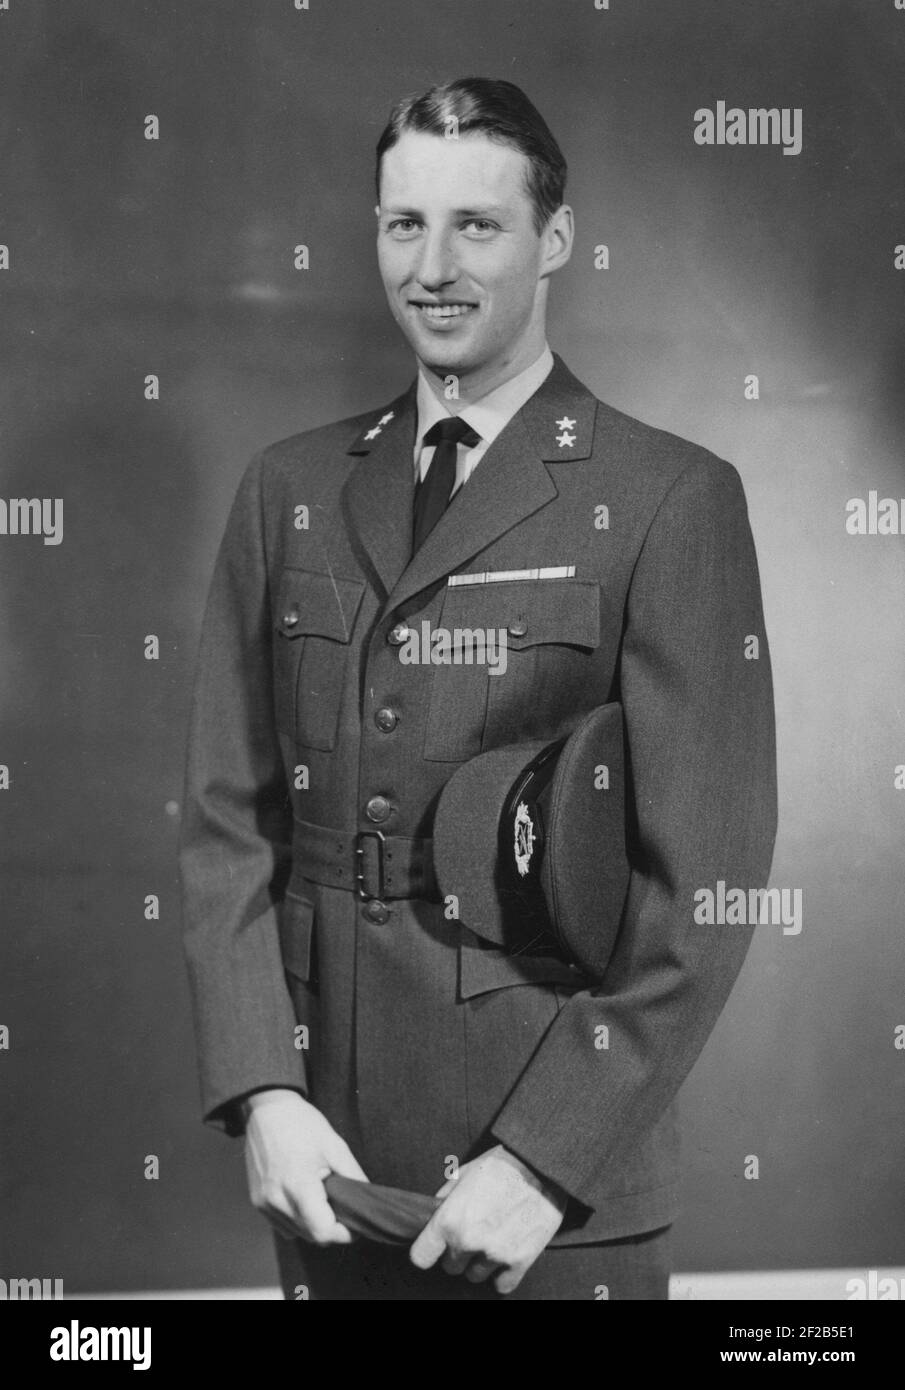 King Harald of Norway. Pictured when being crown prince in the 1950s. Stock Photo